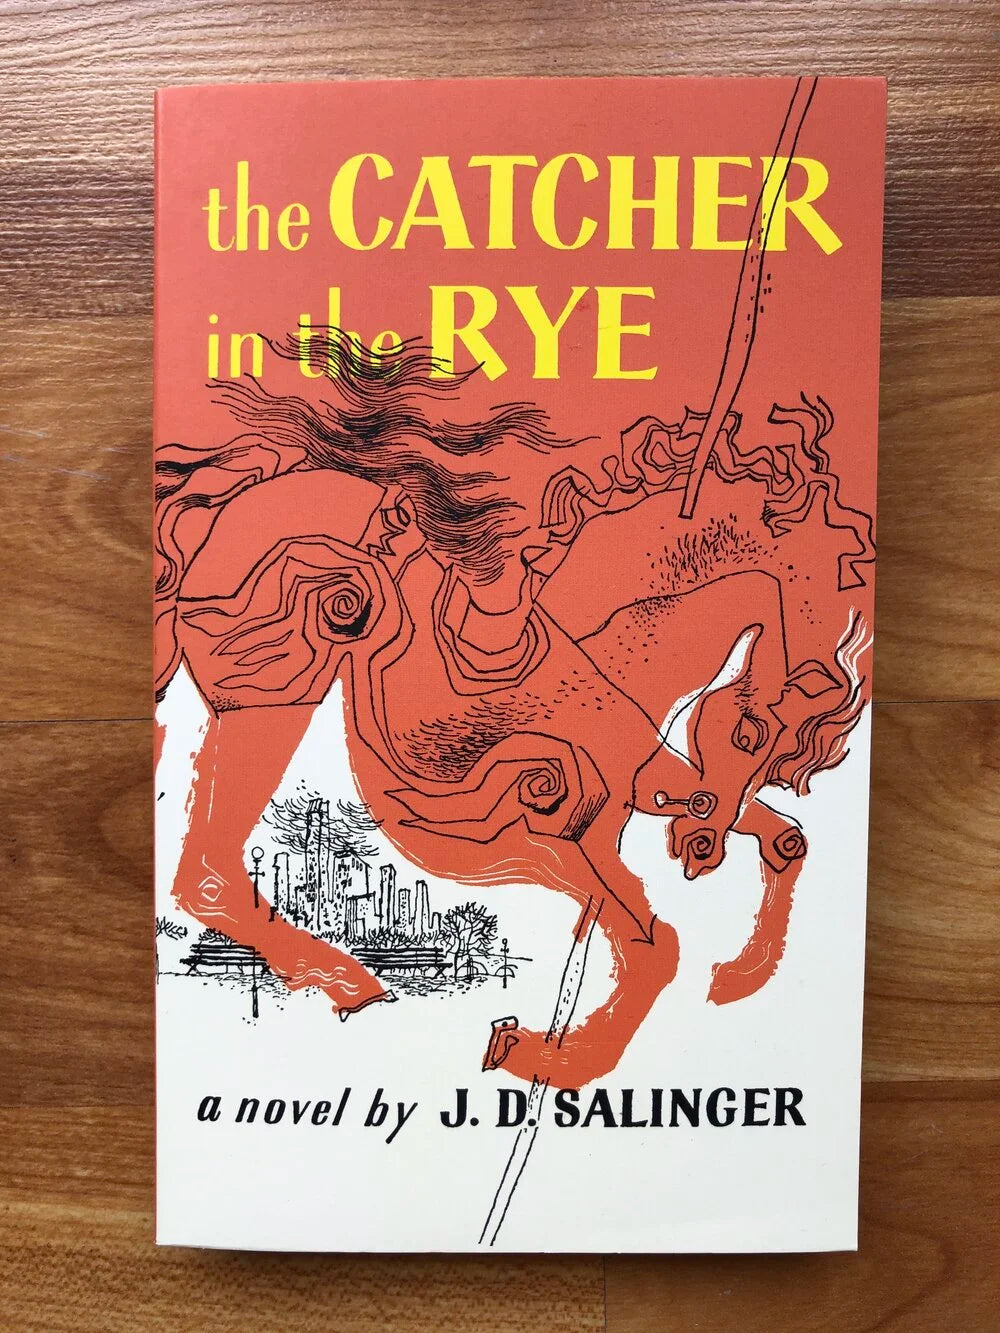 the-catcher-in-the-rye-book-buy - OnlineBooksOutlet